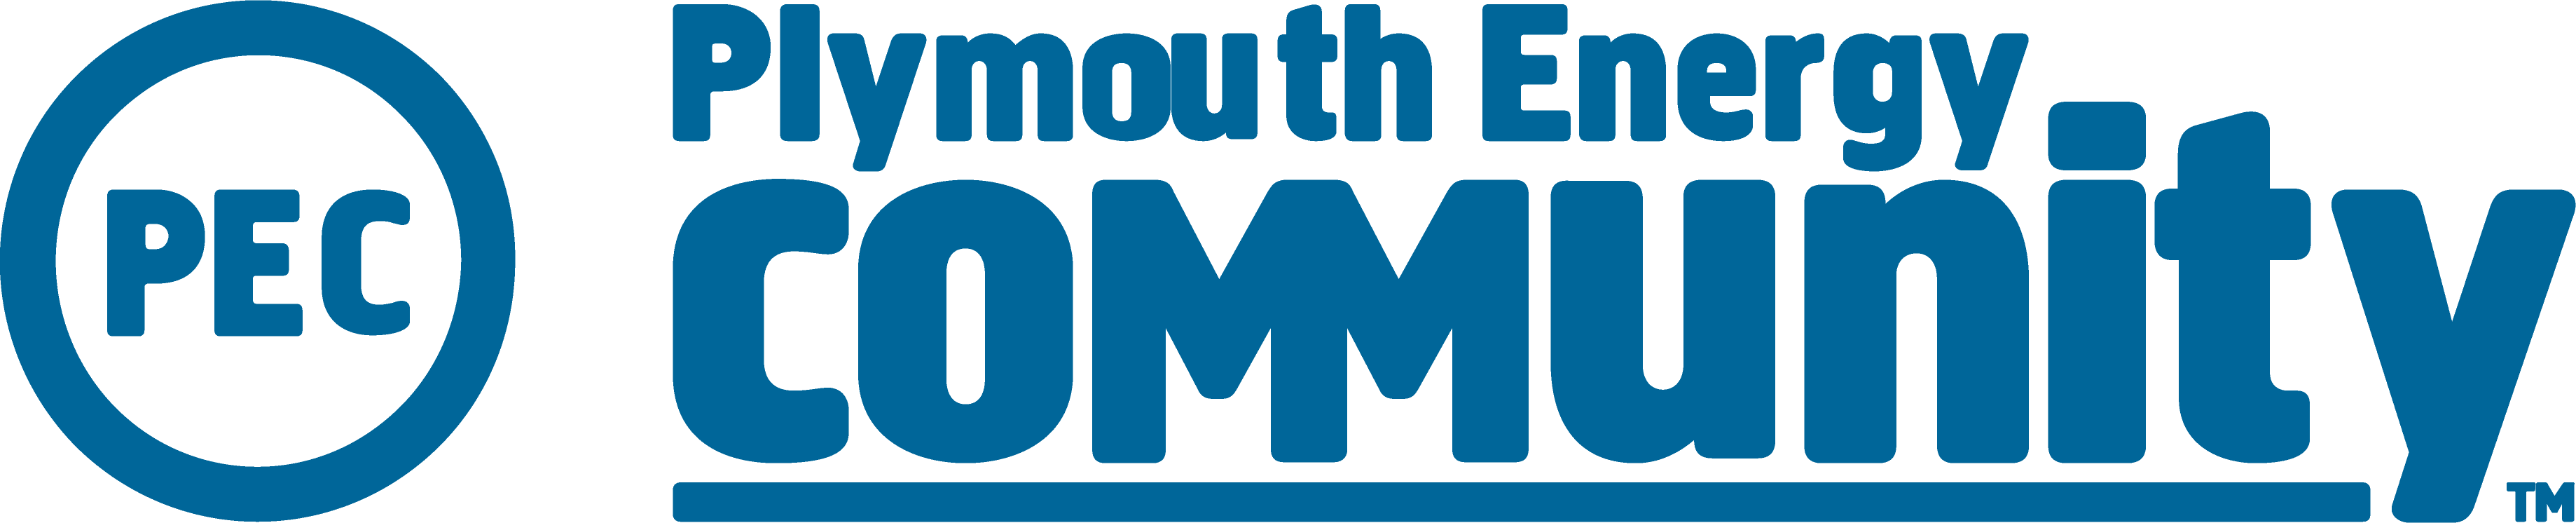 Image for Plymouth Energy Community